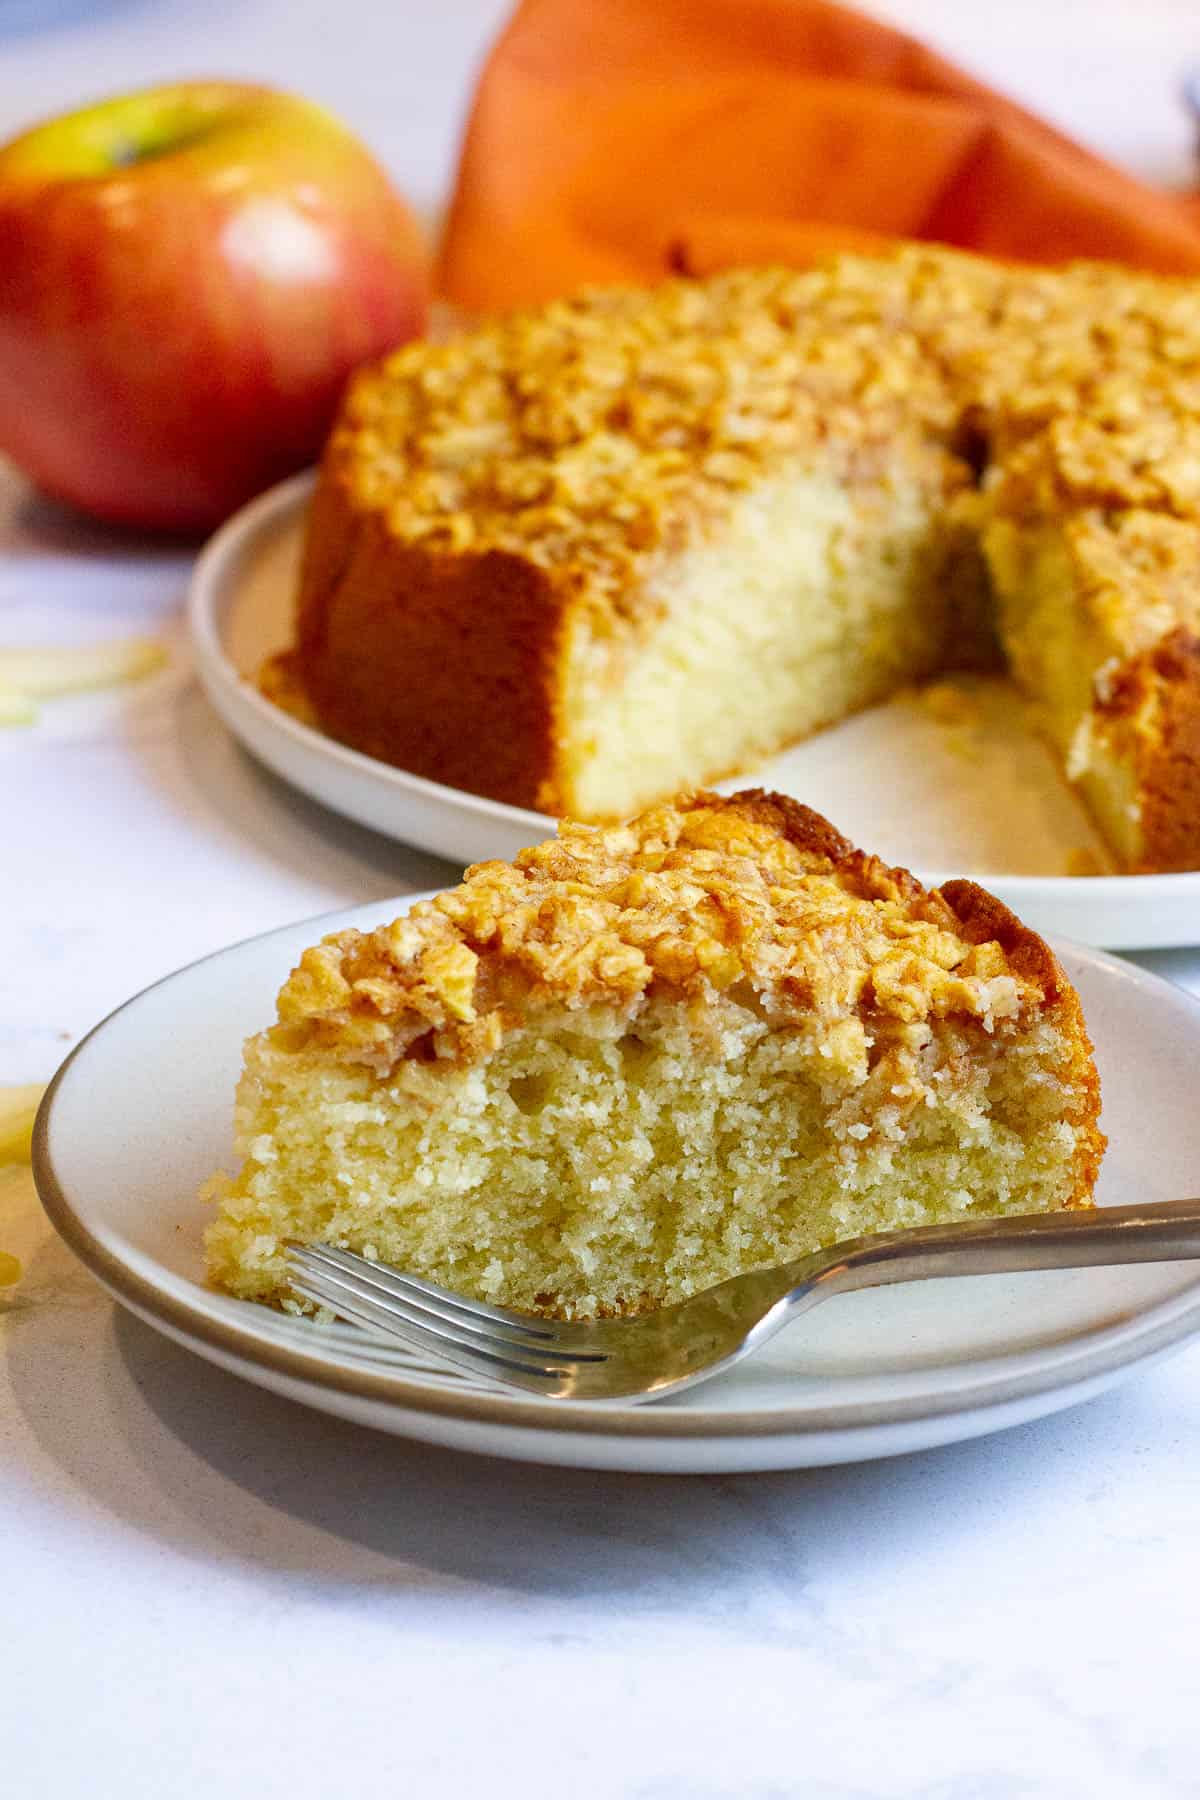 A slice of gluten-free dairy-free apple crumble cake on a plate.